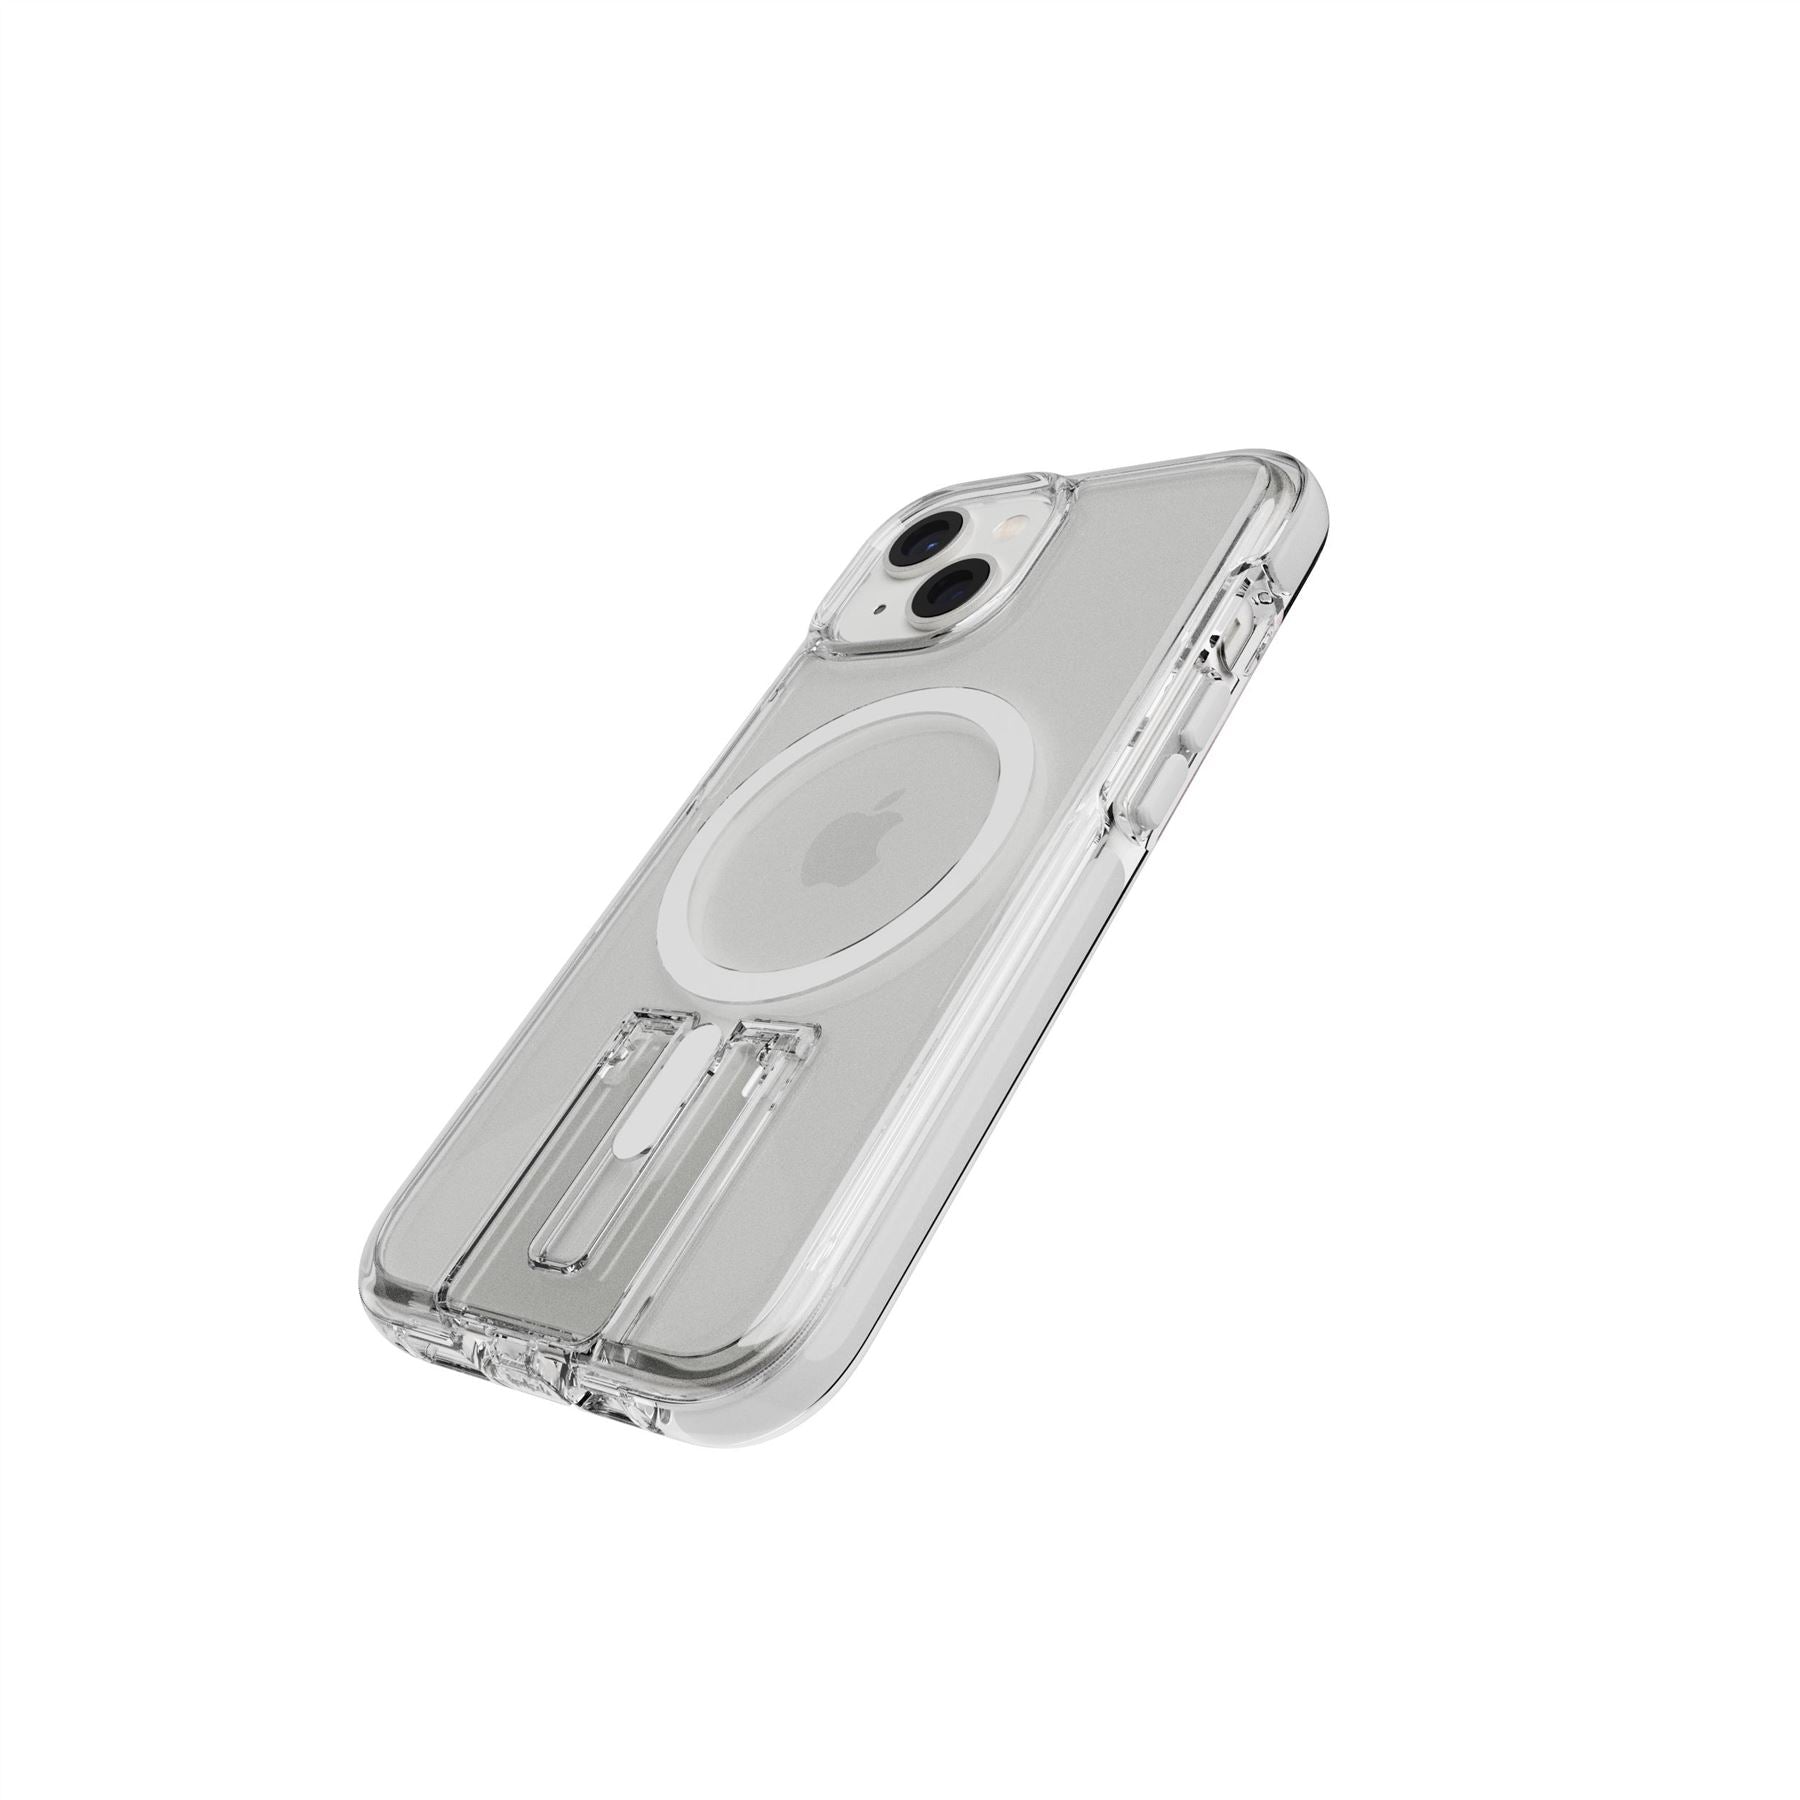 Evo Crystal Kick - Apple iPhone 14 Case MagSafe® Compatible - White